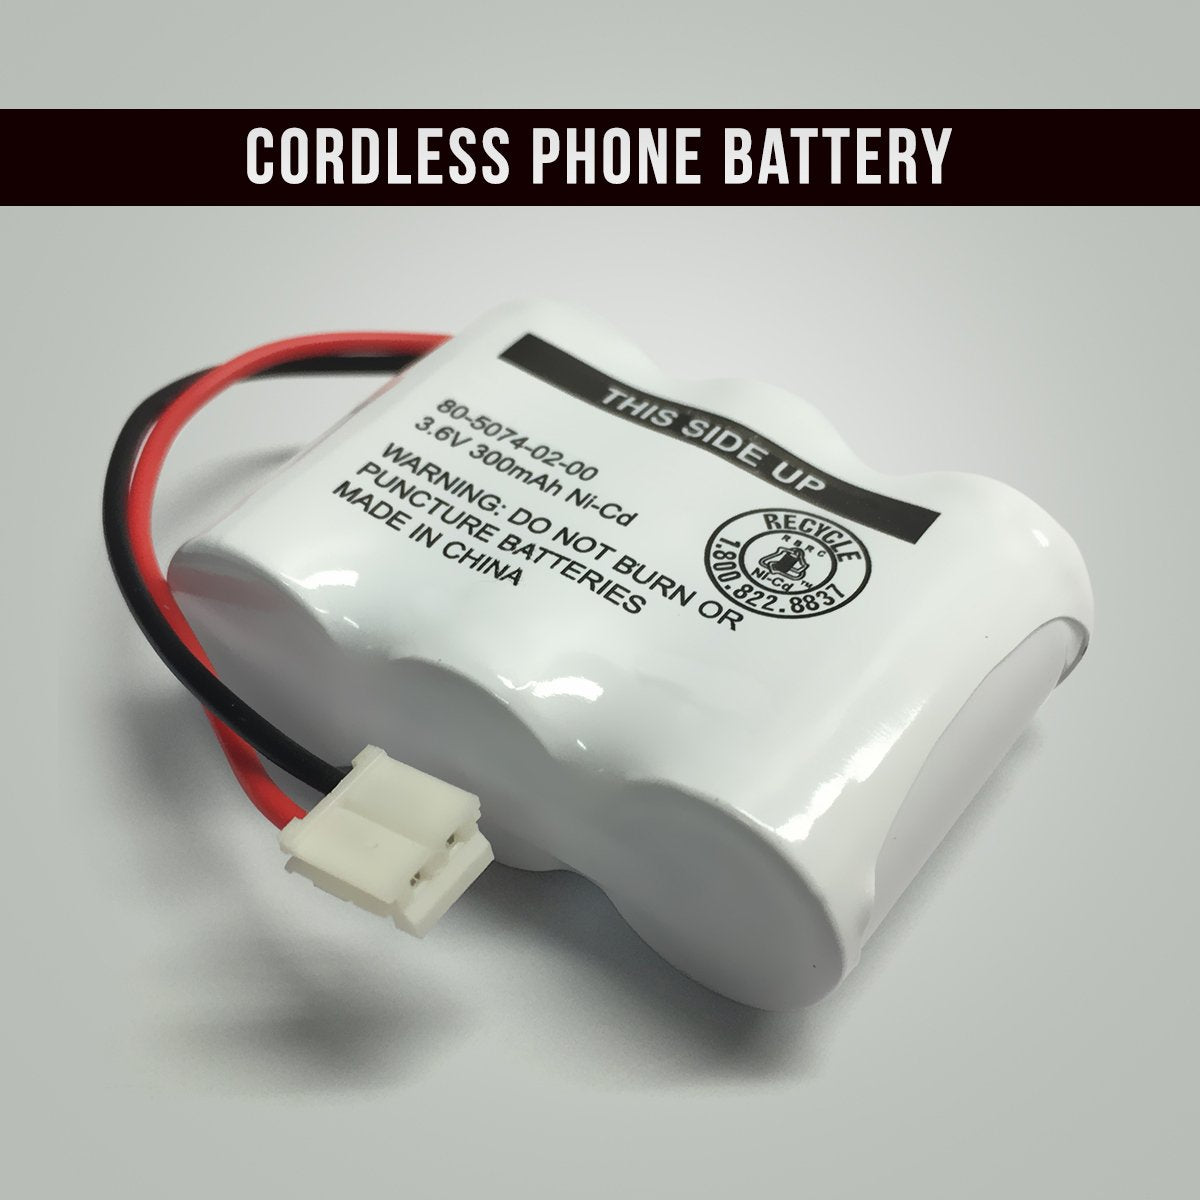 AT&T  MERLINMLC-6 Cordless Phone Battery